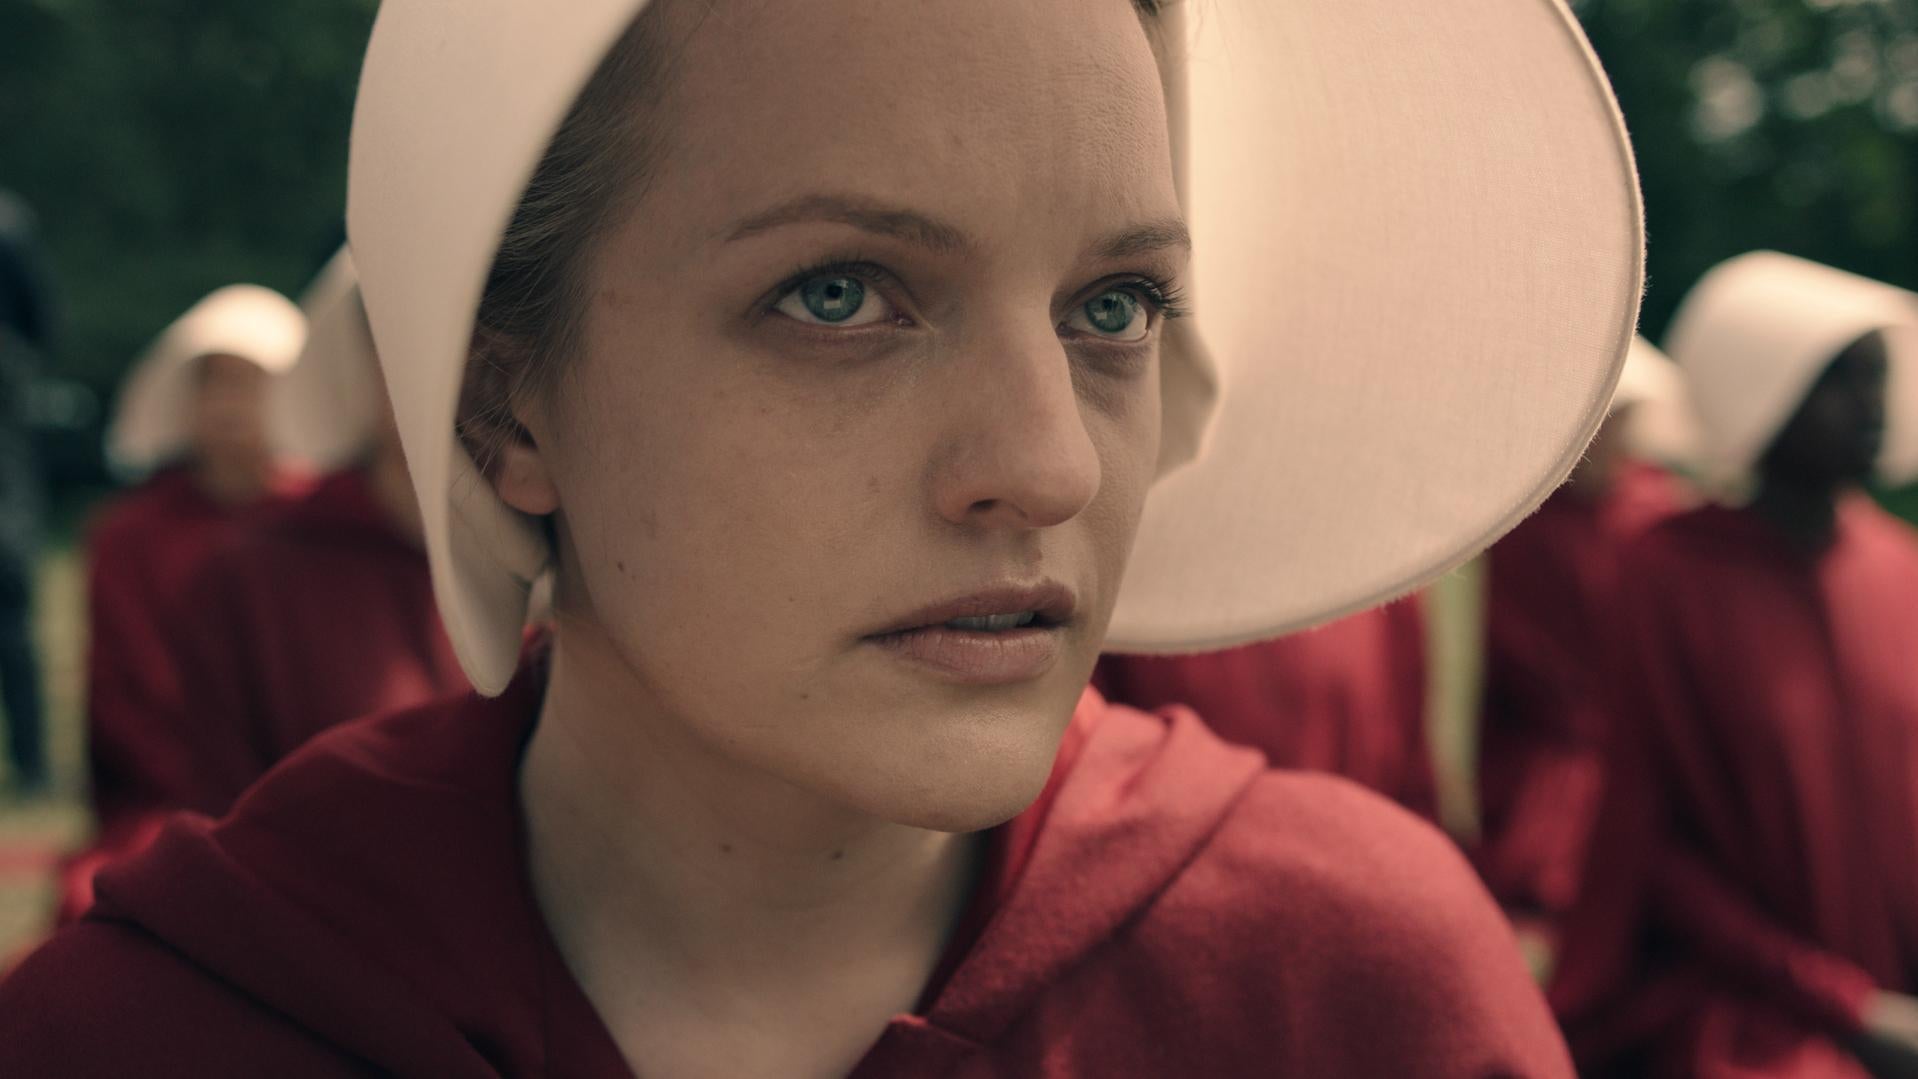 ‘The Handmaid’s Tale’ was awarded the trophy for Outstanding Drama Series